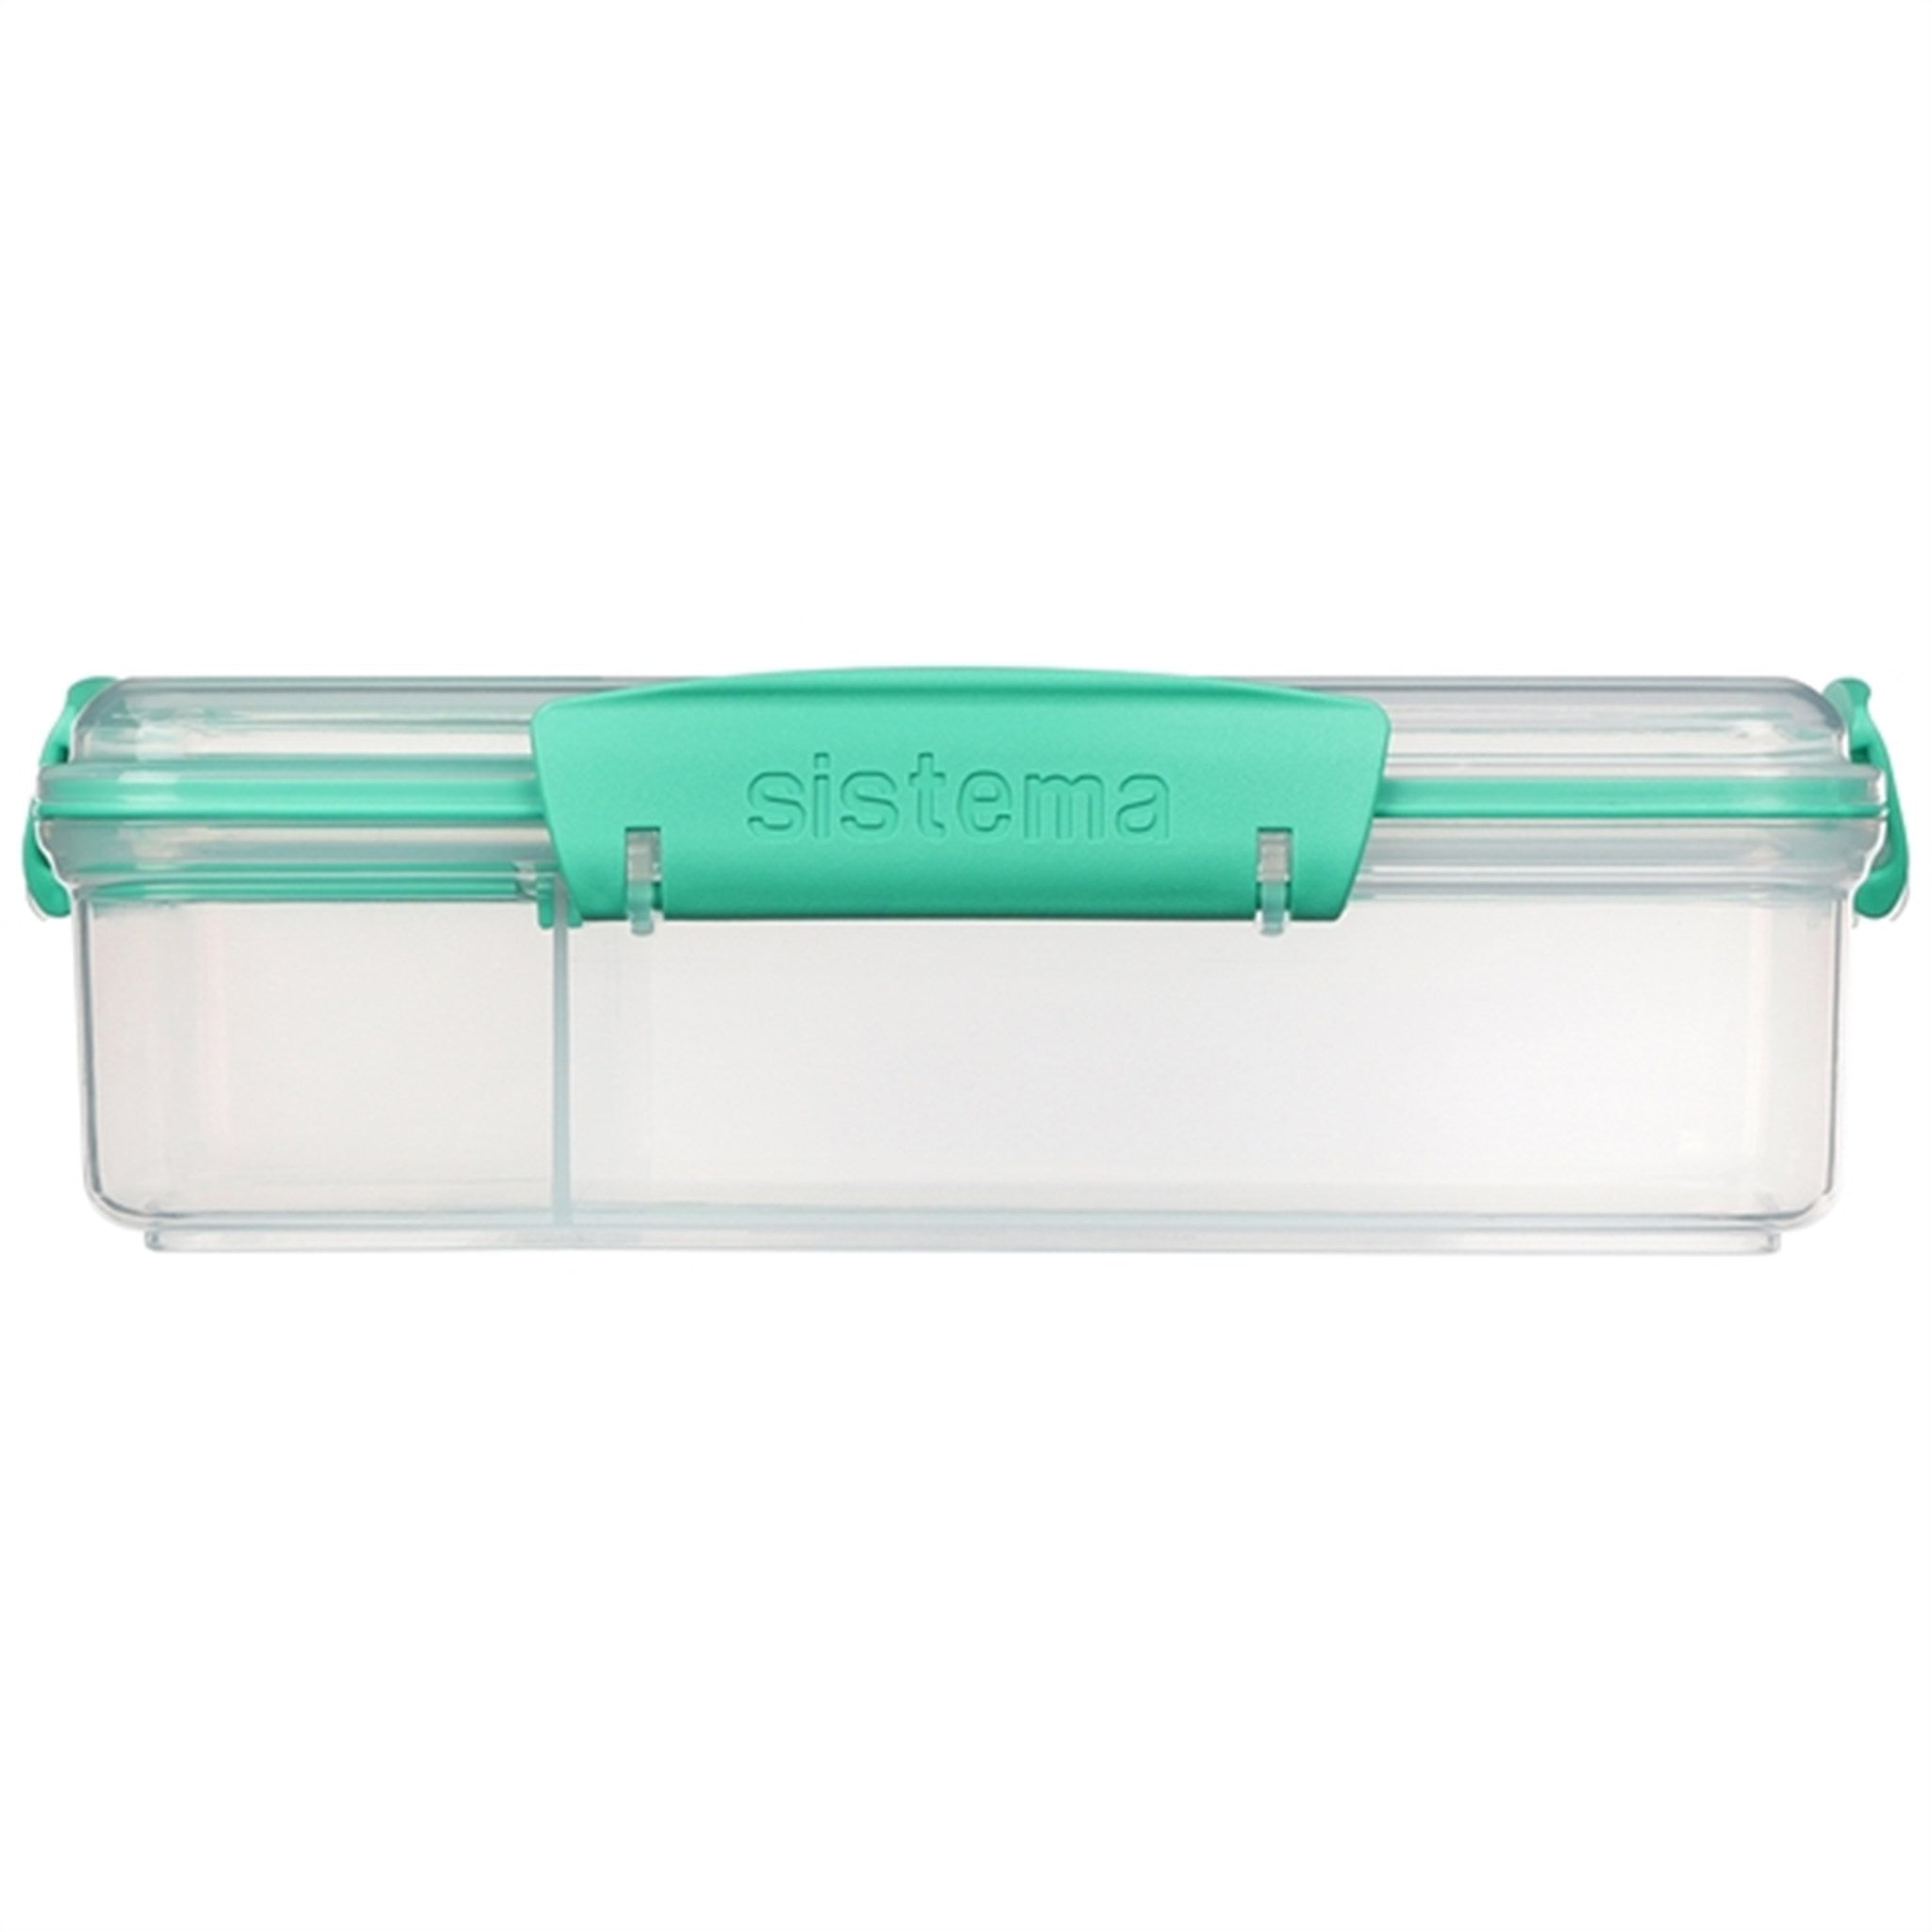 Sistema To Go Snack Attack Duo Matboks 975 ml Minty Teal 2